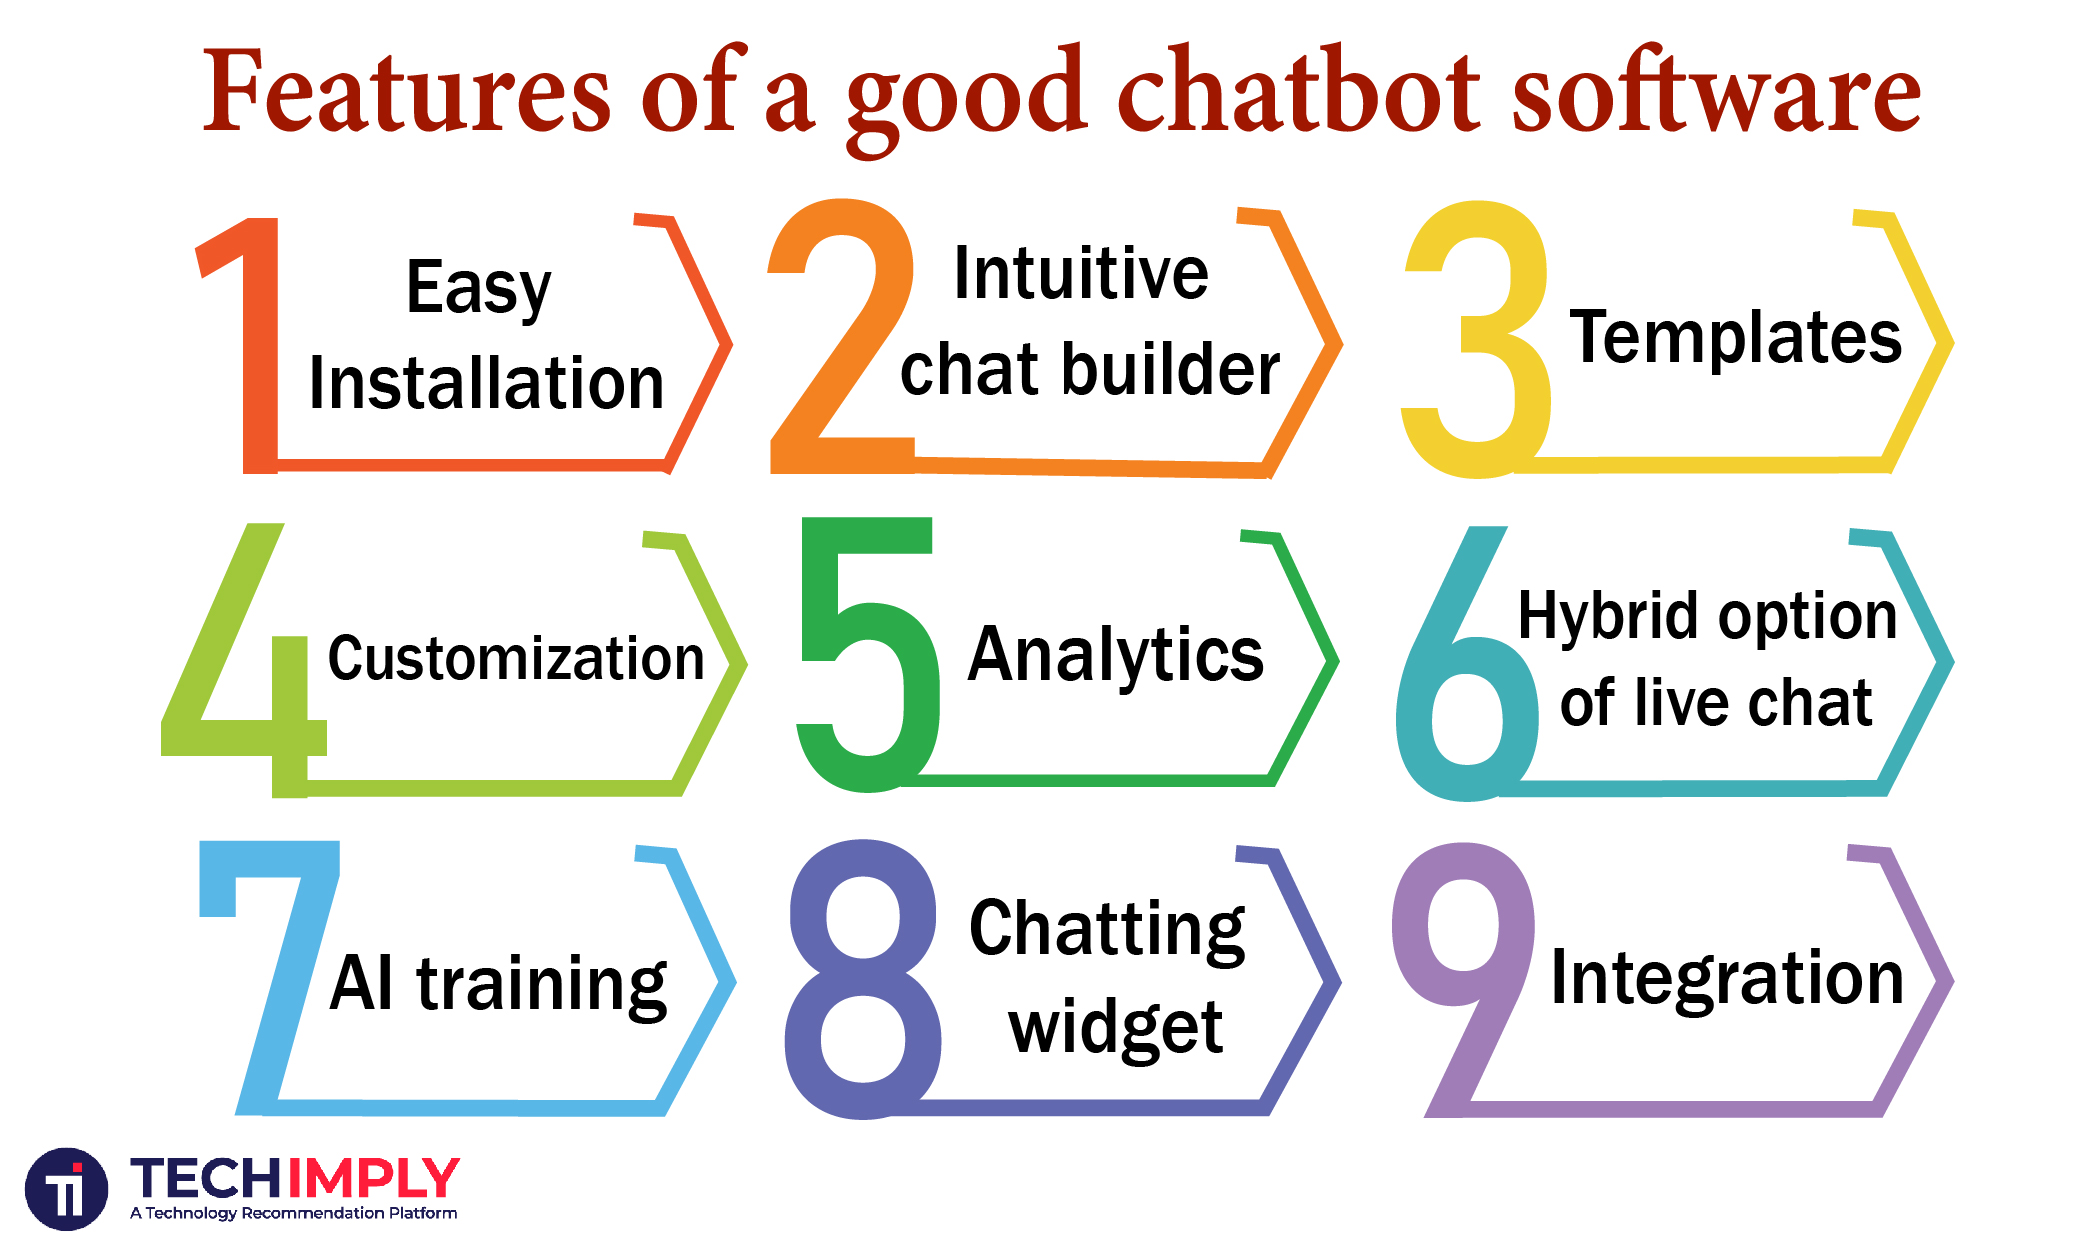 Features of chatbot software